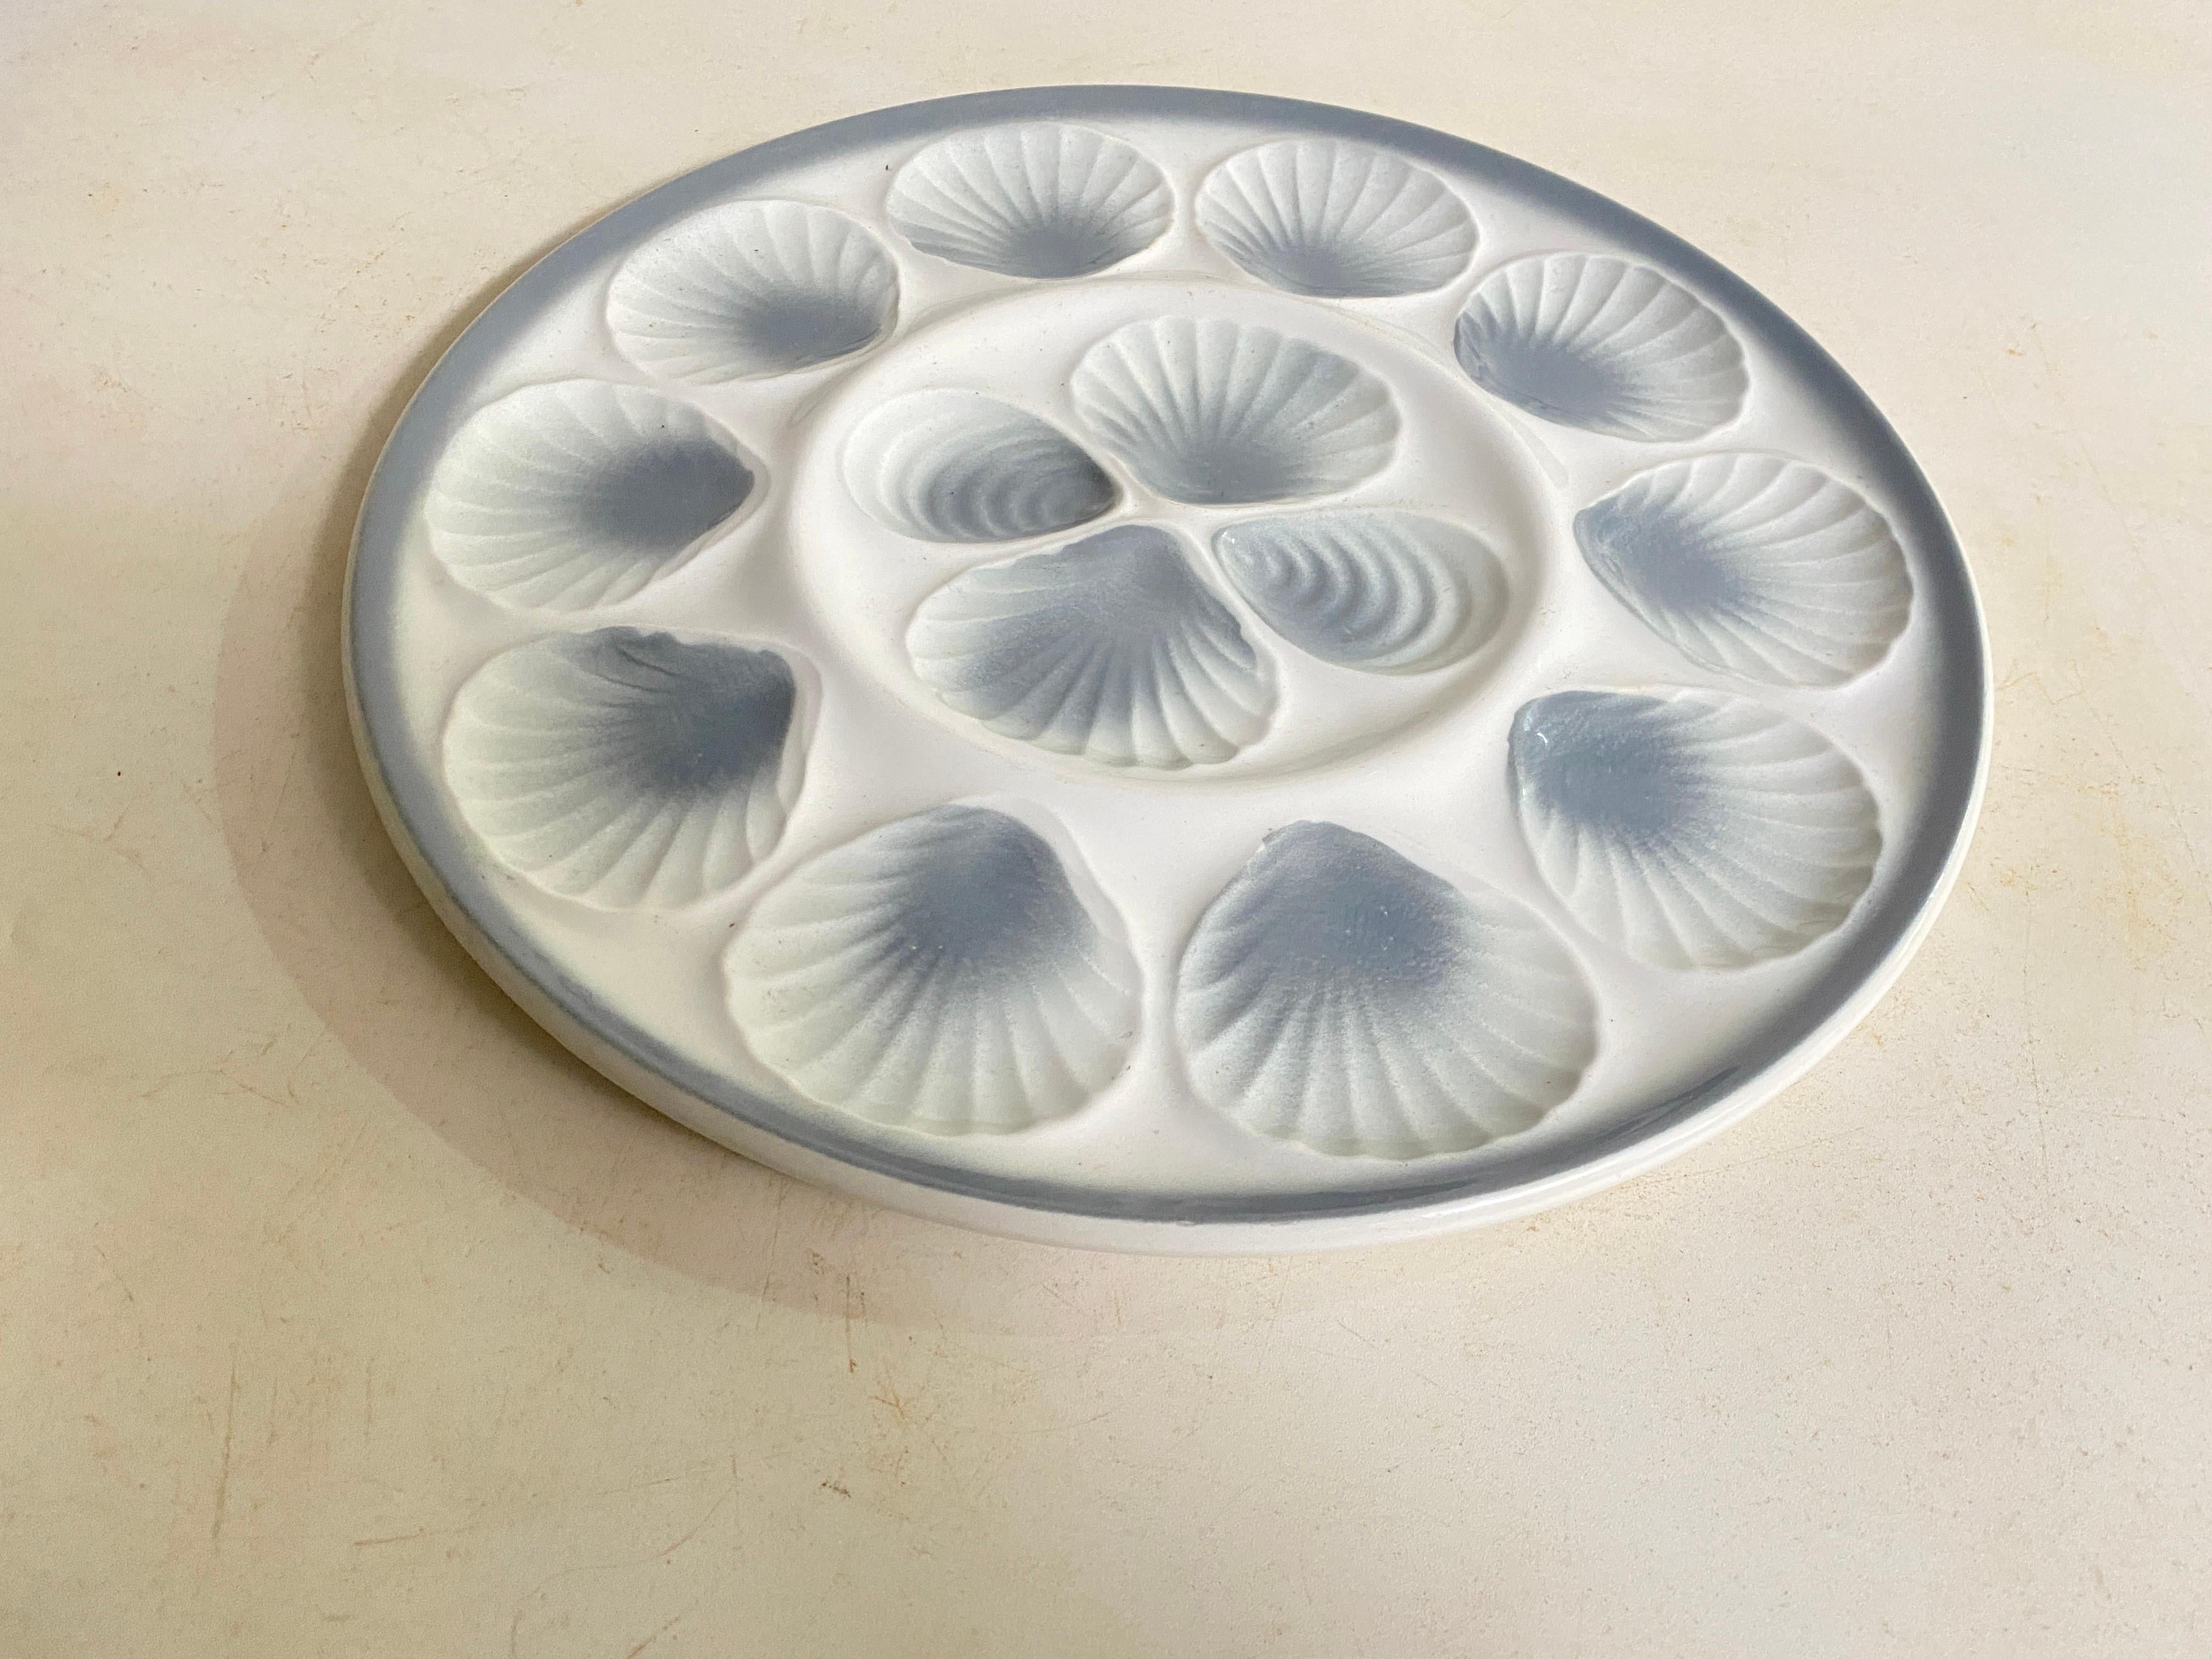 Large Oyster Plate / Dish in Ceramic Grey Color 1960 France by Moulin des Loups  For Sale 1